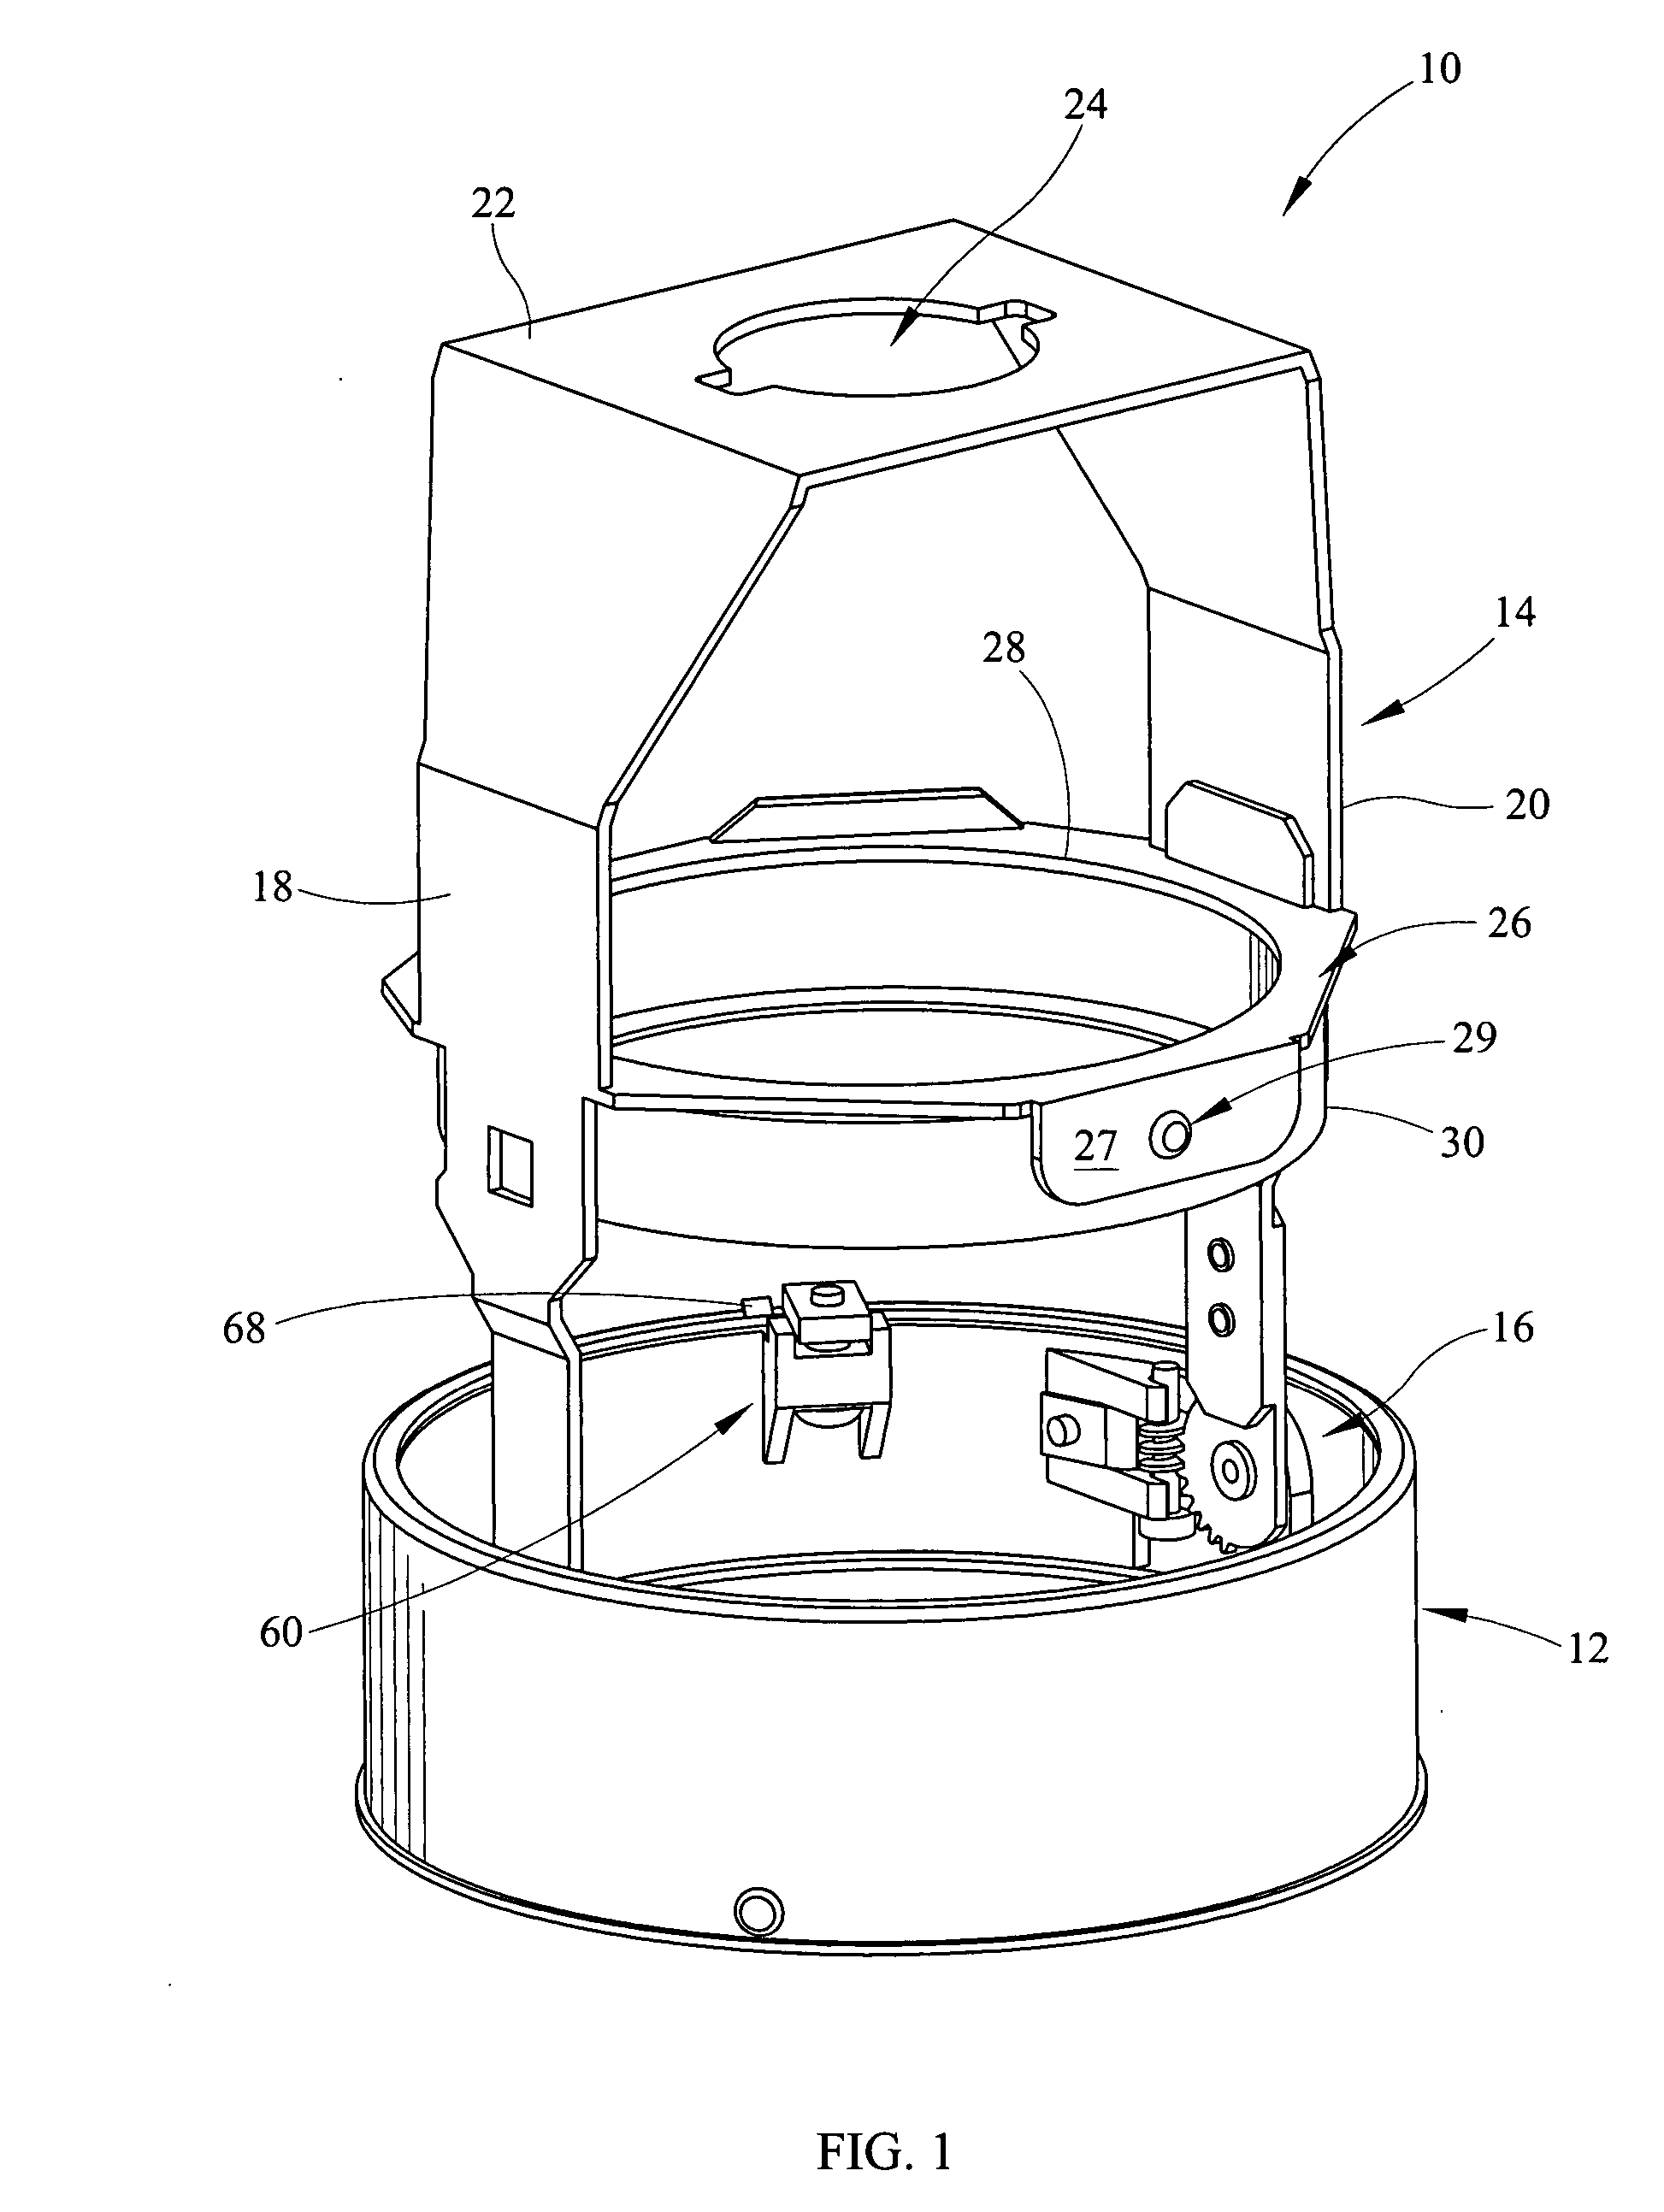 Worm gear drive aiming and locking mechanism